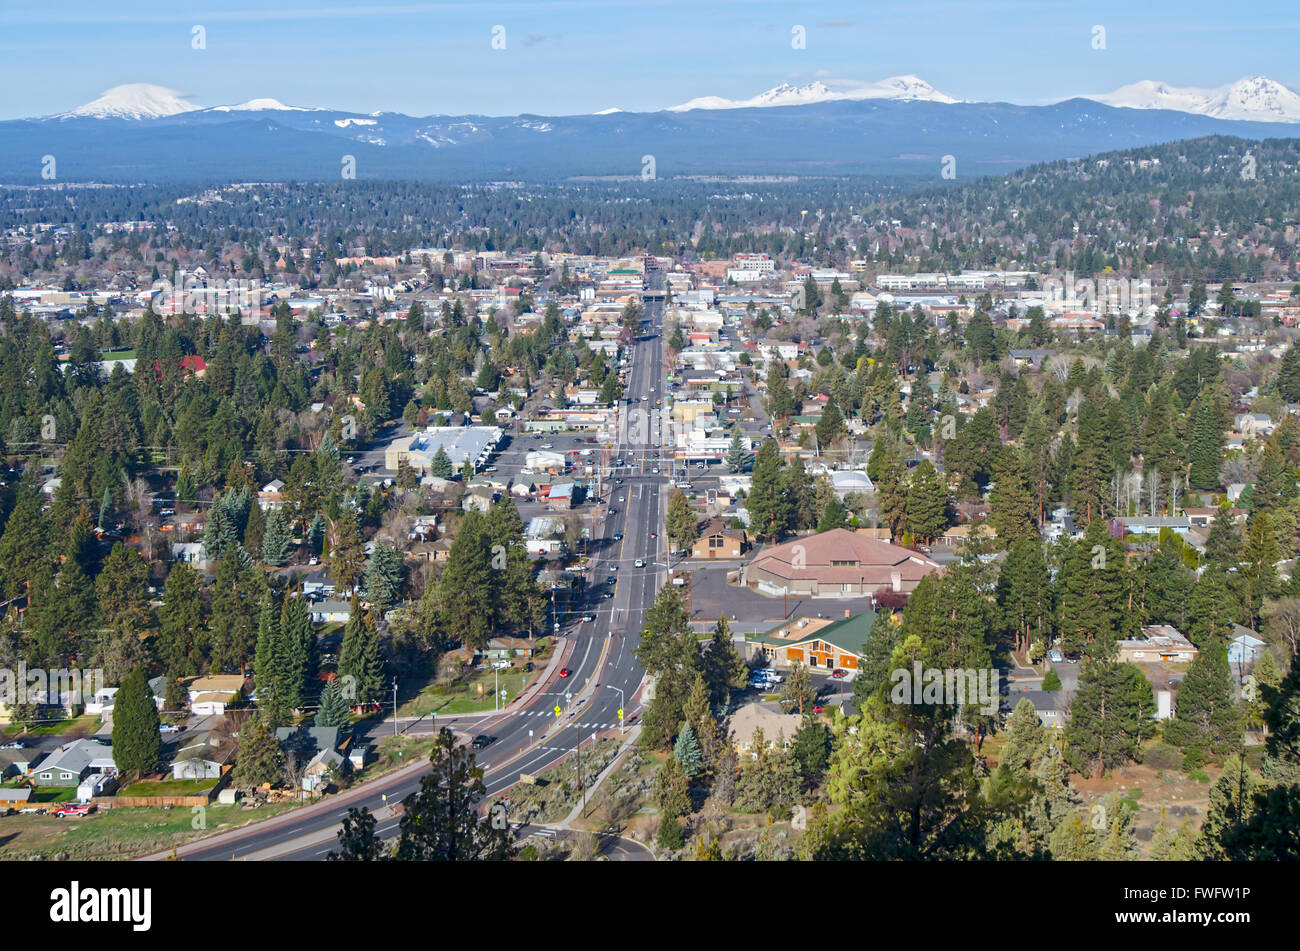 View of Bend, Oregon from Pilot Butte State Scenic Viewpoint summit Stock Photo